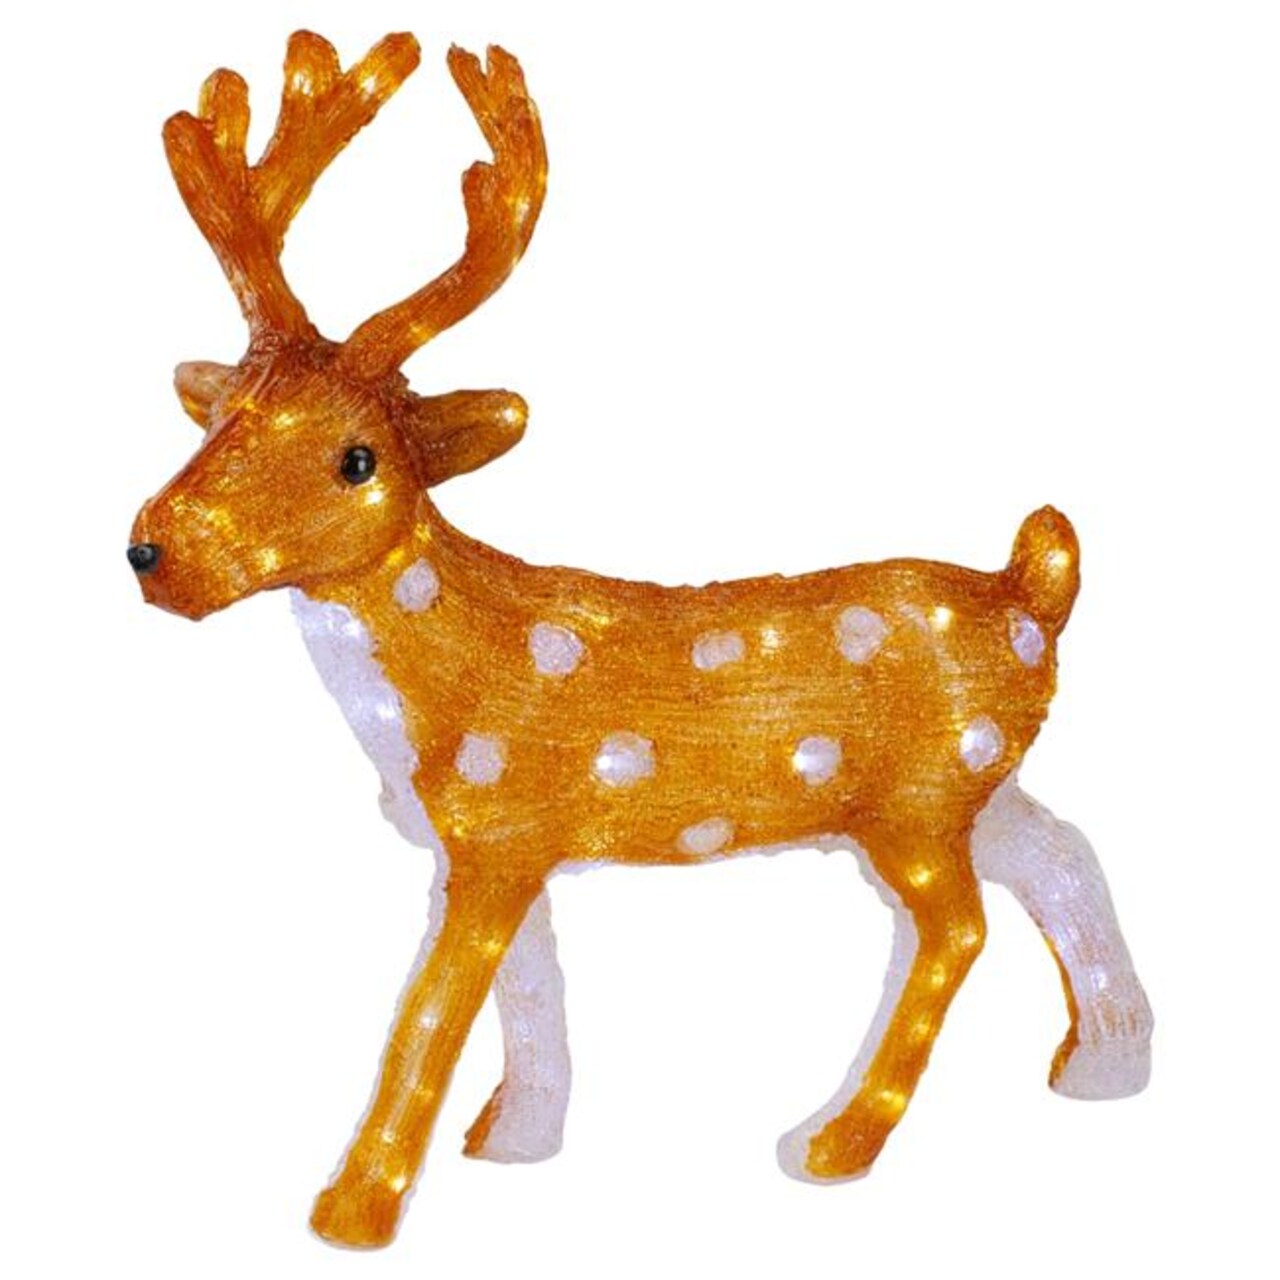 Northlight 34850800 24 in. Lighted Commercial Grade Acrylic Reindeer with Antlers Christmas Display Decoration